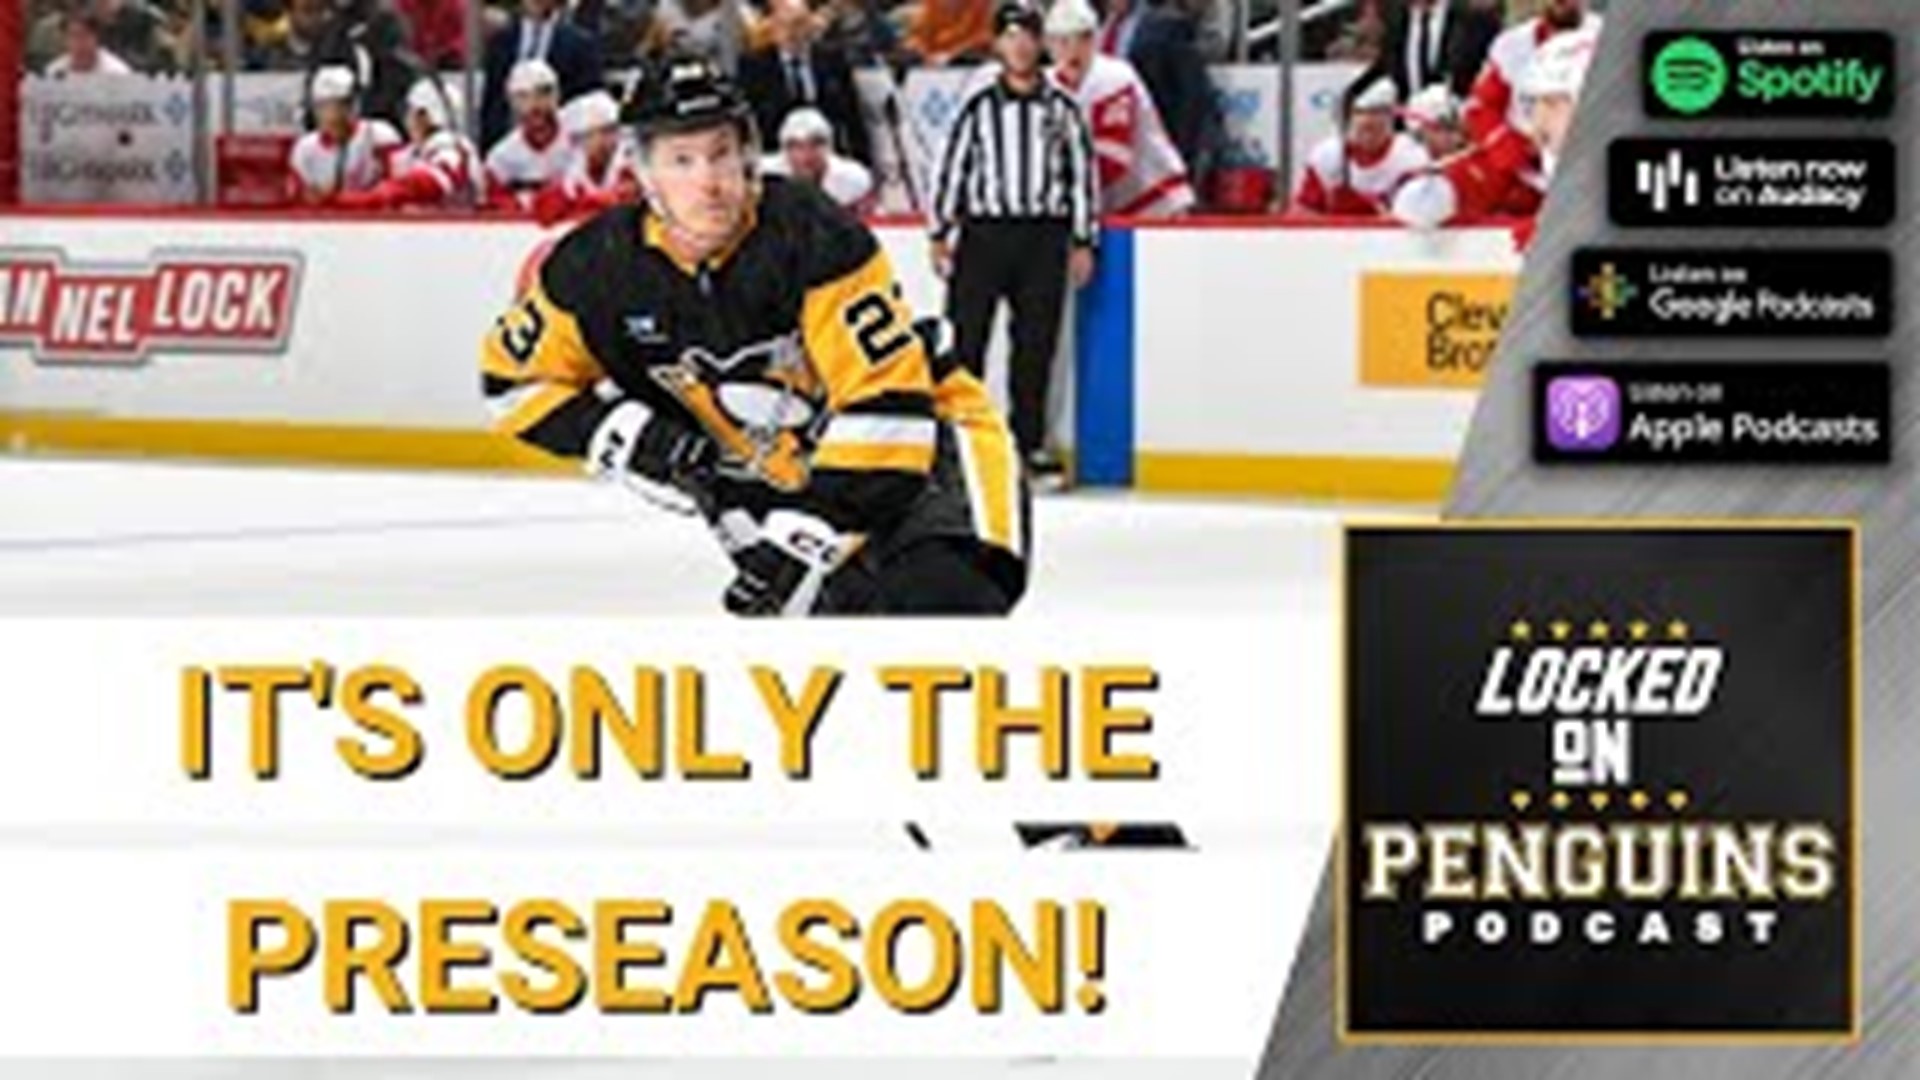 Hunter is joined by Doug Glattke of Penguins Twitter and of ForecheckingTv as they break down the positives and negatives of the performance.